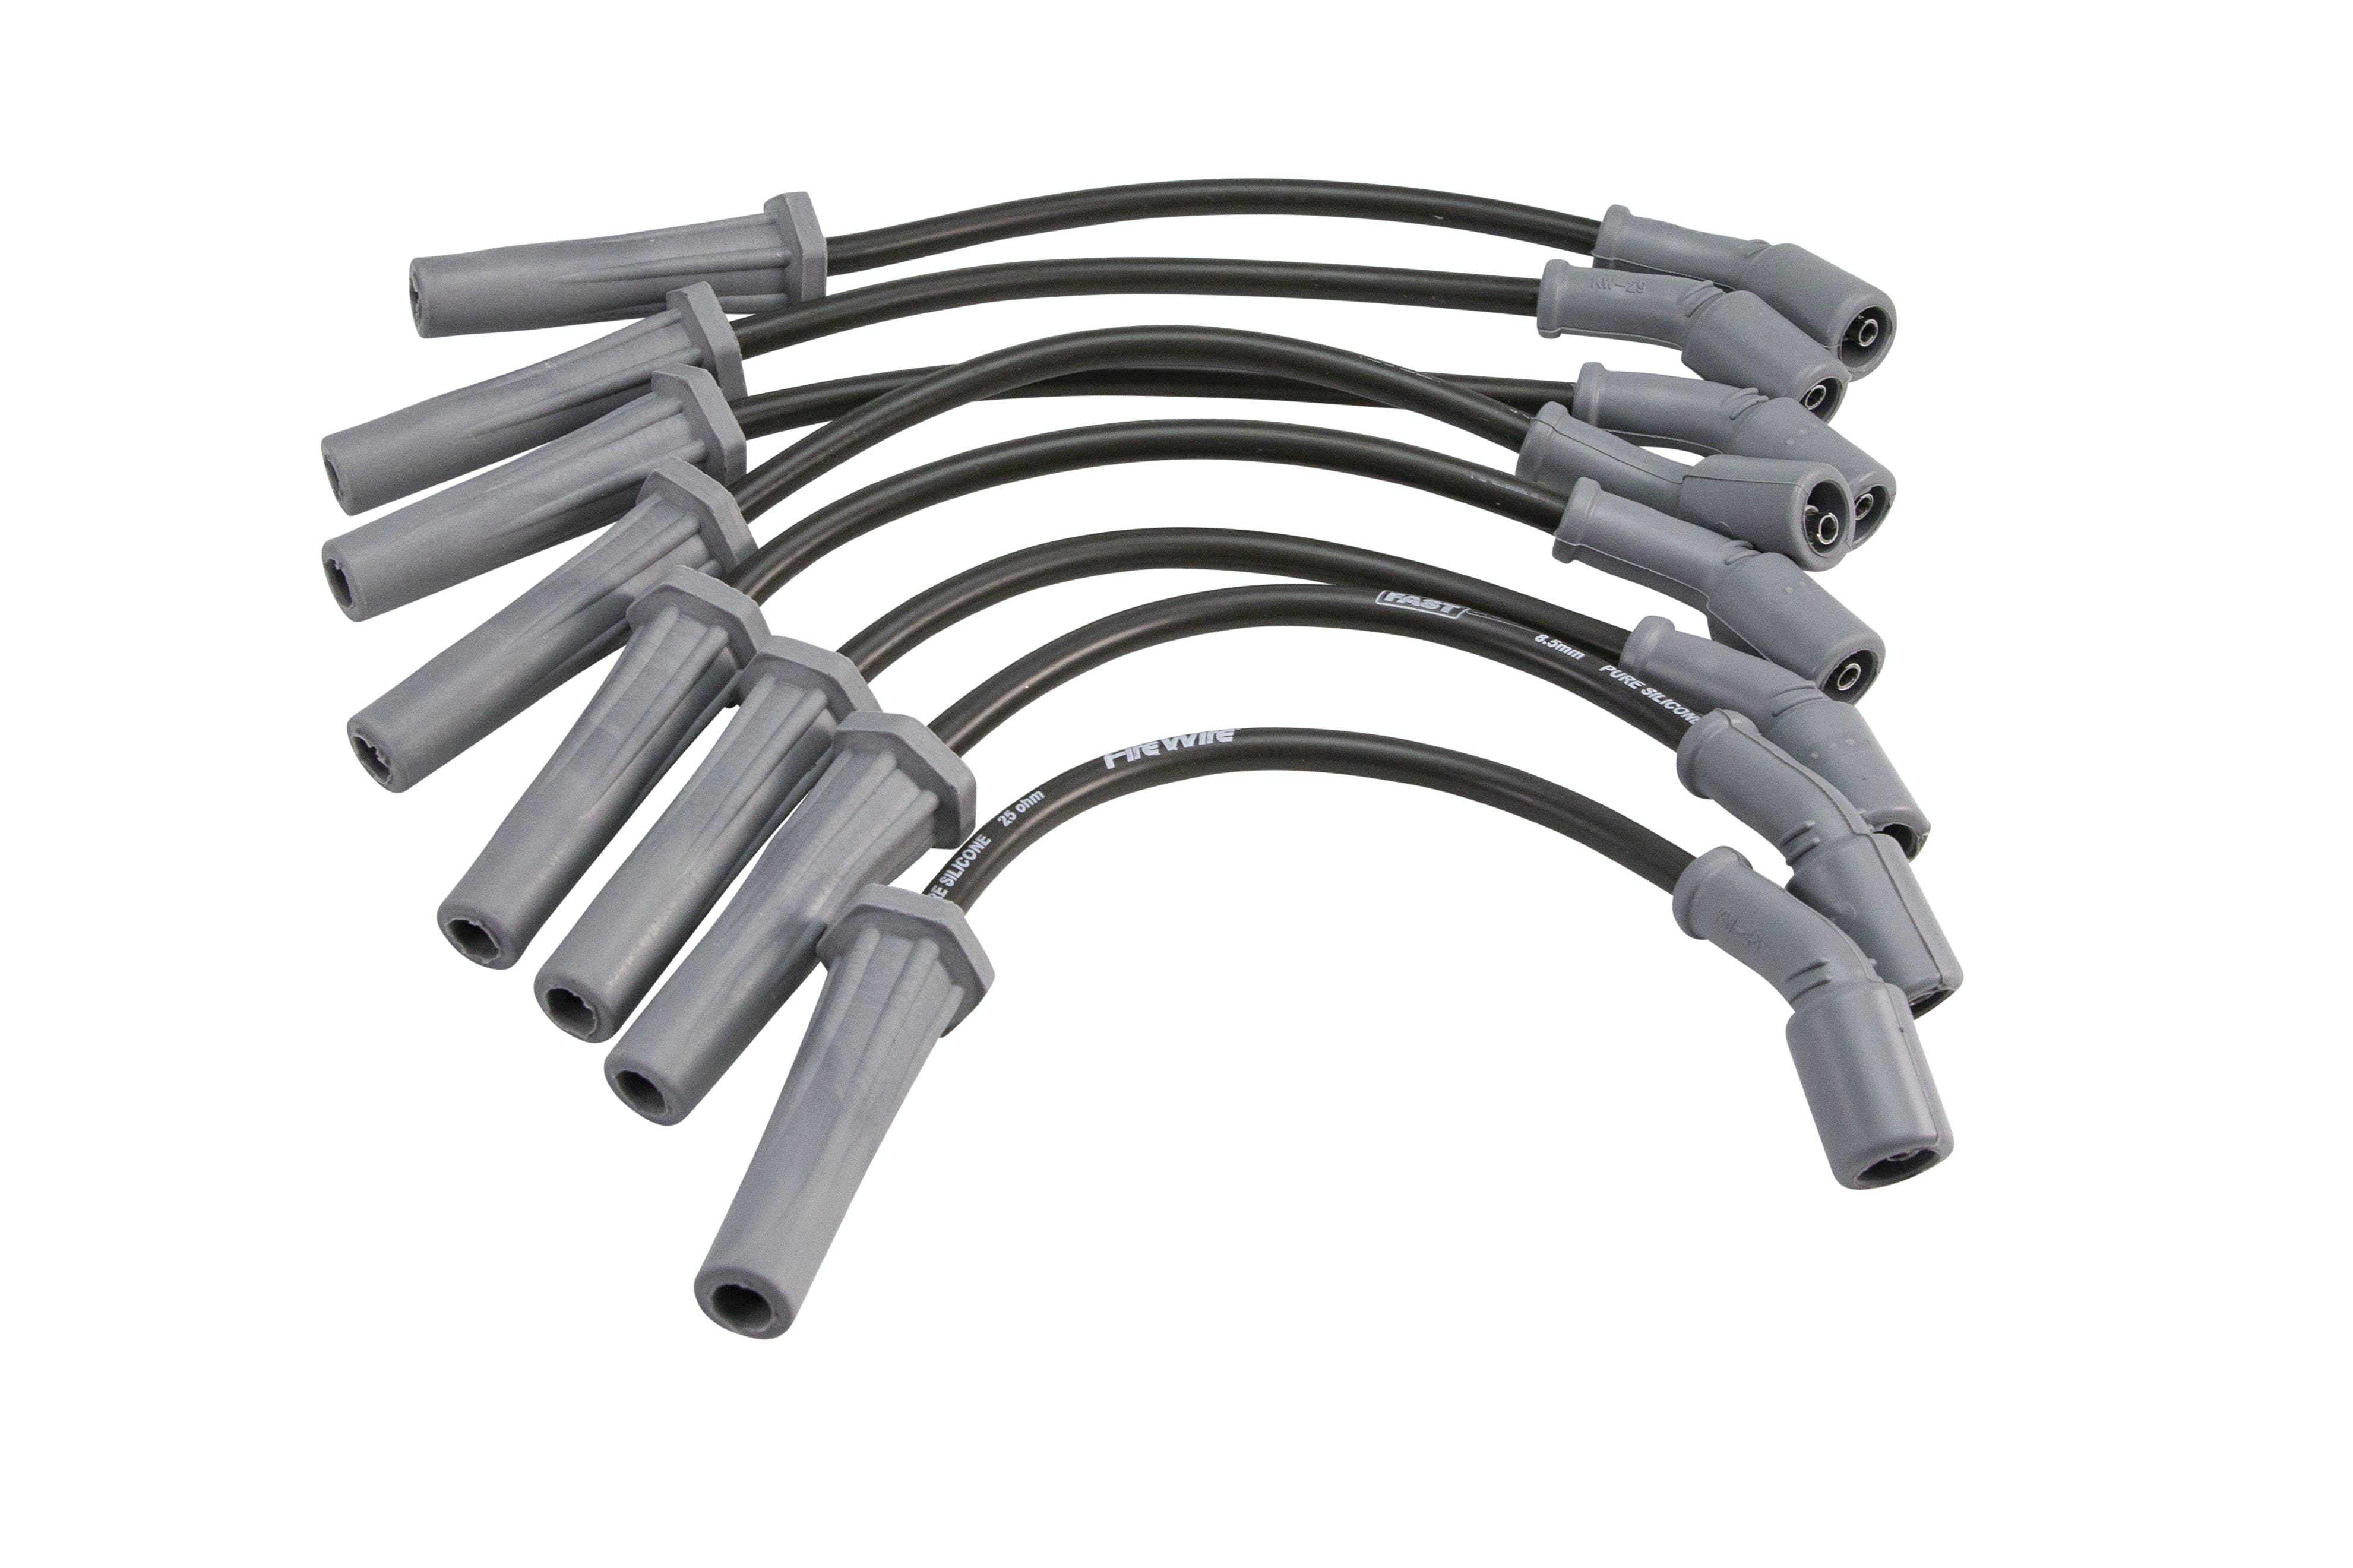 FAST - Fuel Air Spark Technology 255-2420 LS Series Spark Plug Wireset for GM Truck/SUV with 4.8/5.3/6.0/6.2